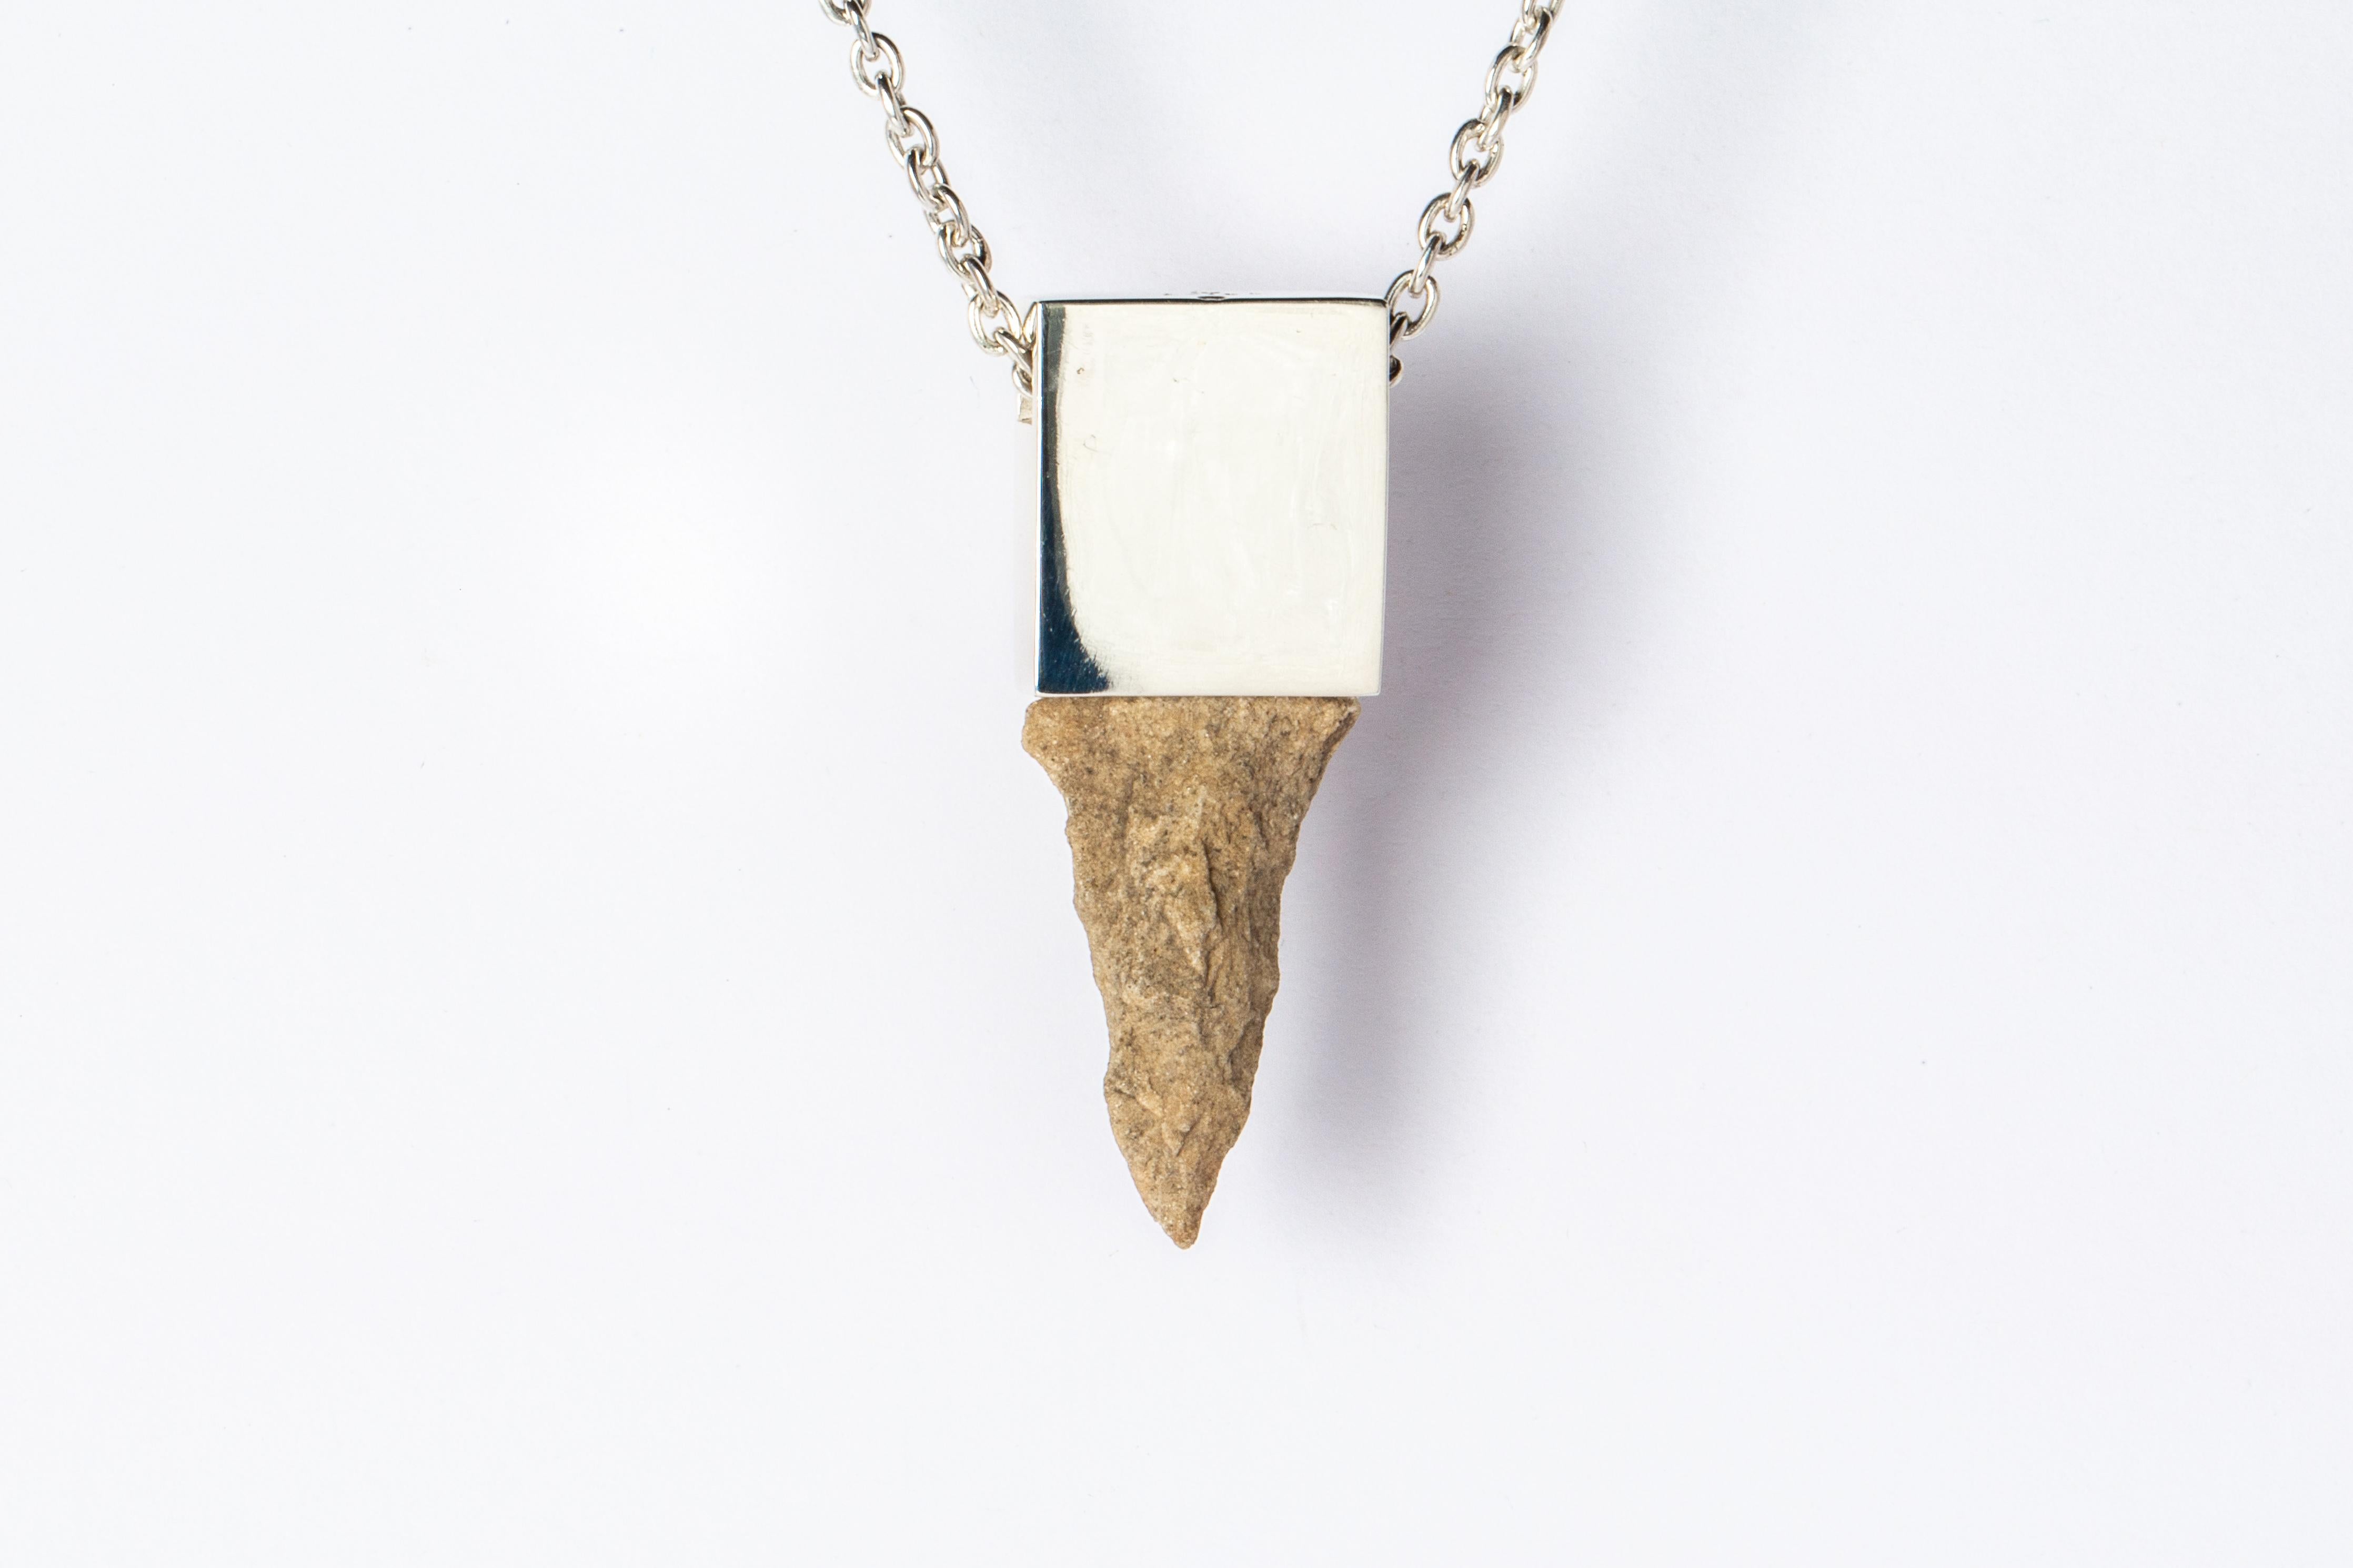 Arrowhead Amulet Cuboid Necklace (PA+ARW) In New Condition For Sale In Hong Kong, Hong Kong Island